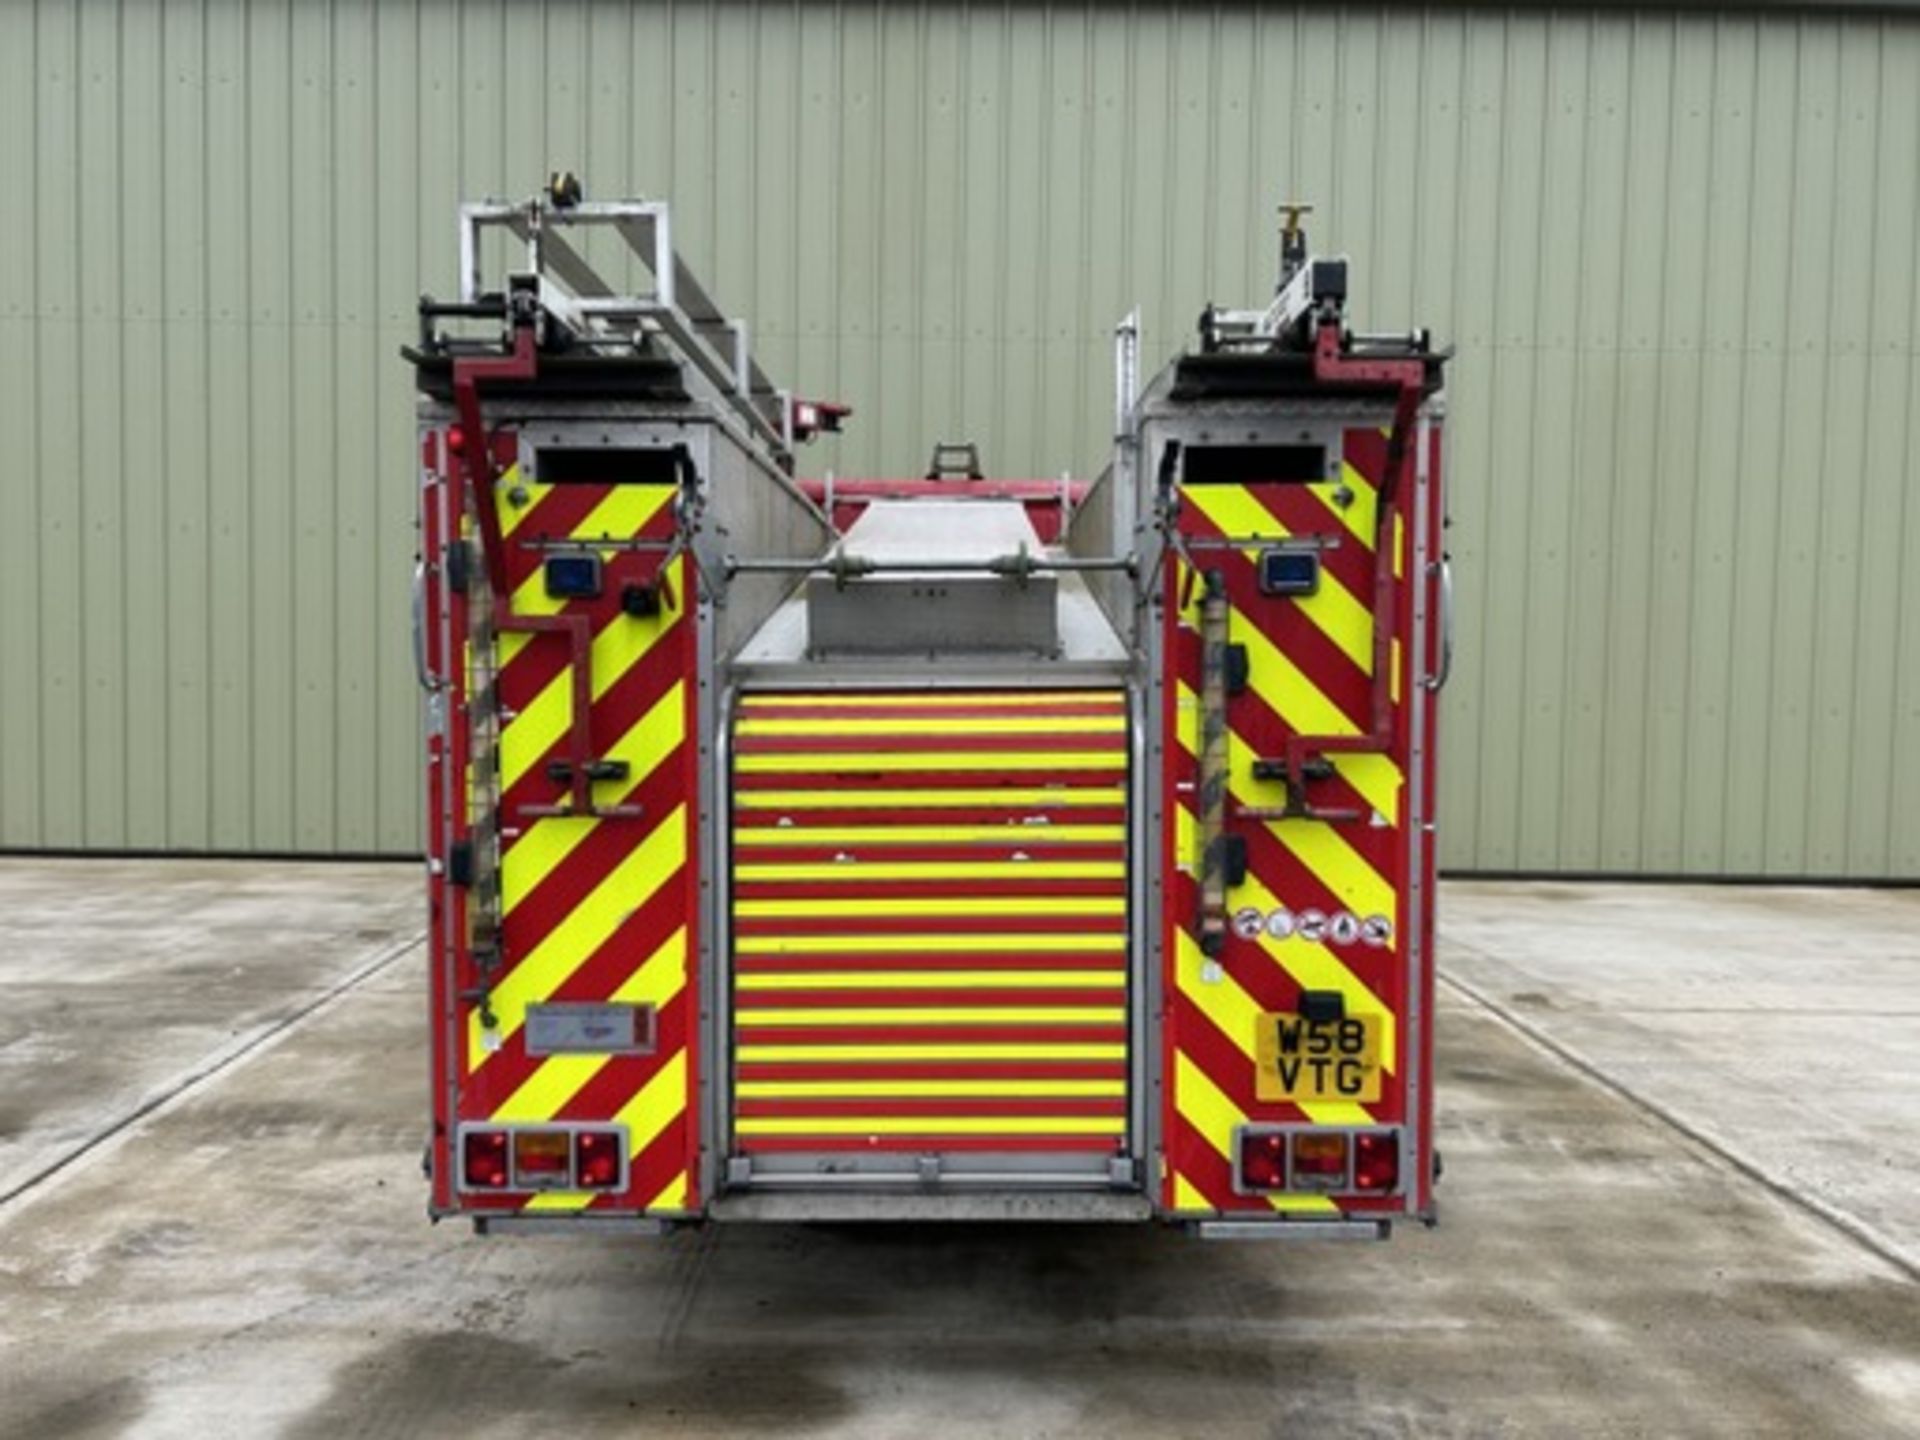 Scania Excalibur 94D 260 Fire Appliance - Image 6 of 26